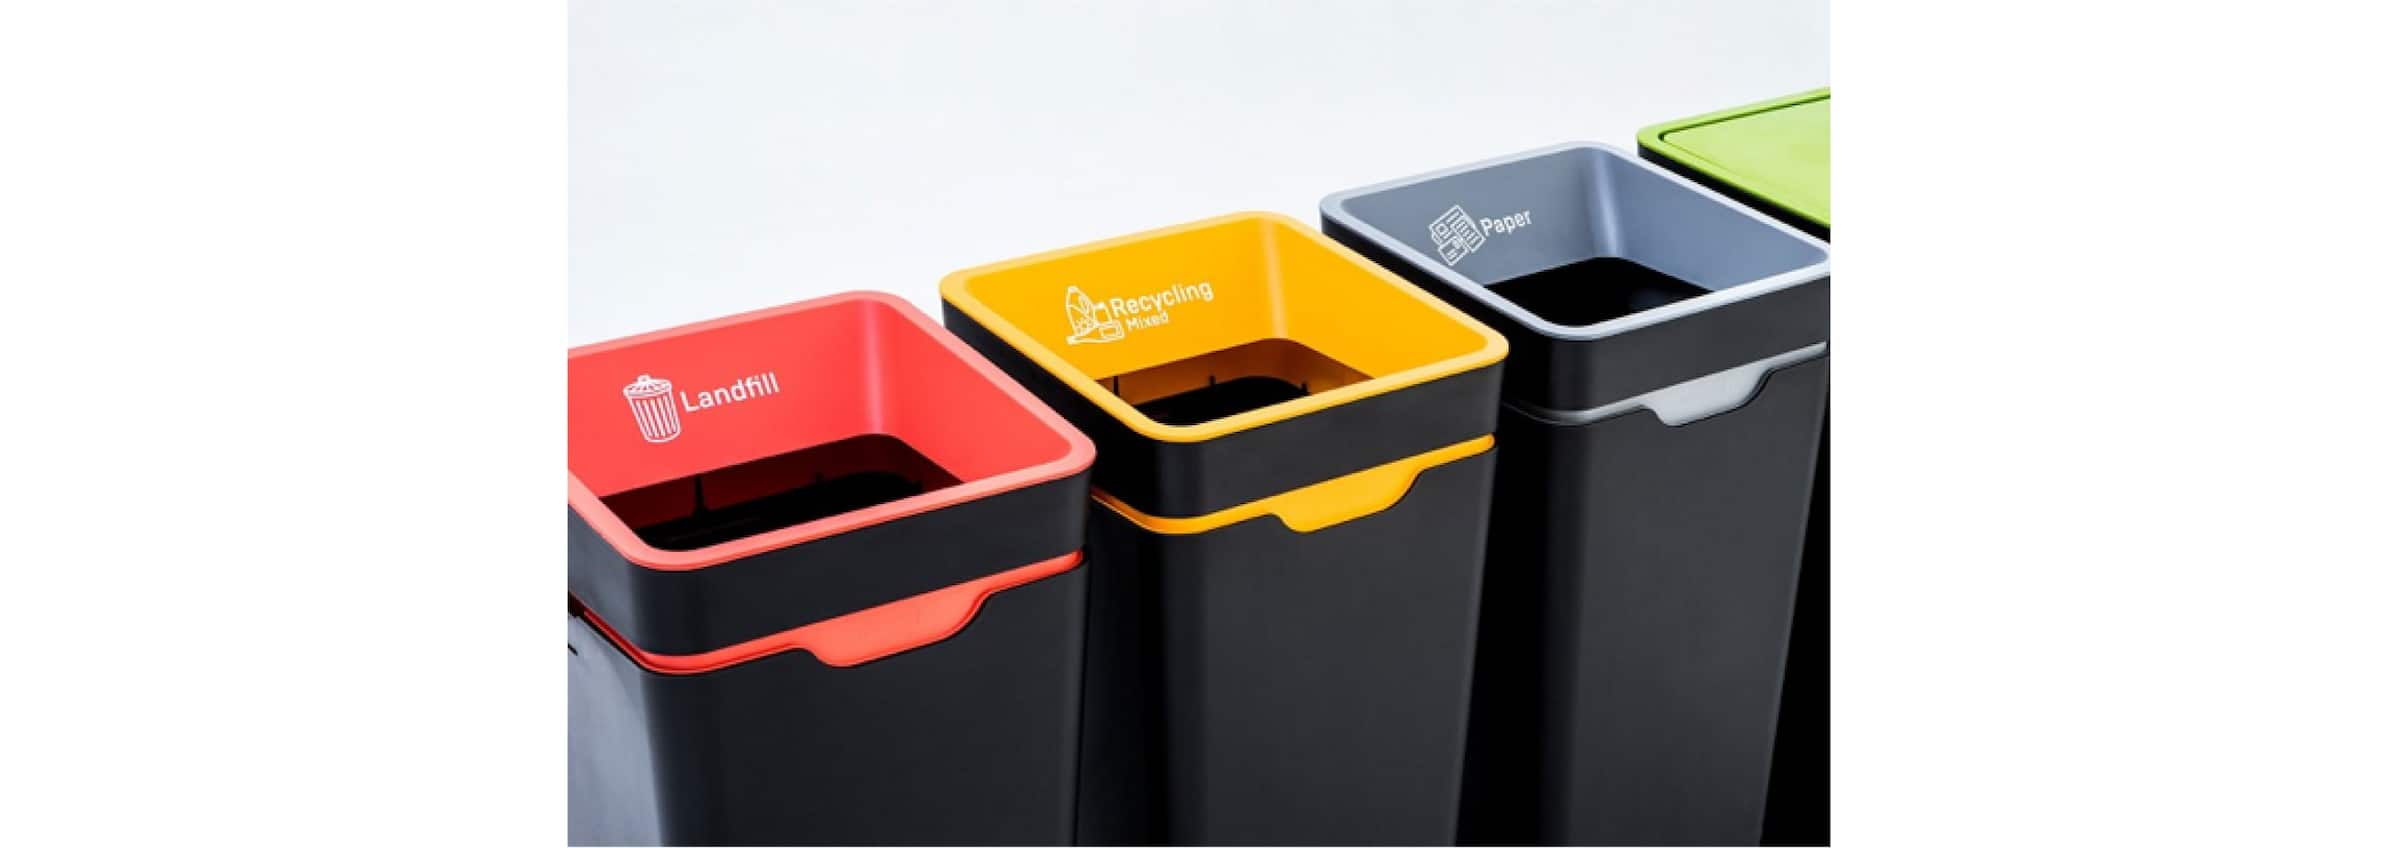 Three bins for landfill, recycling and paper.